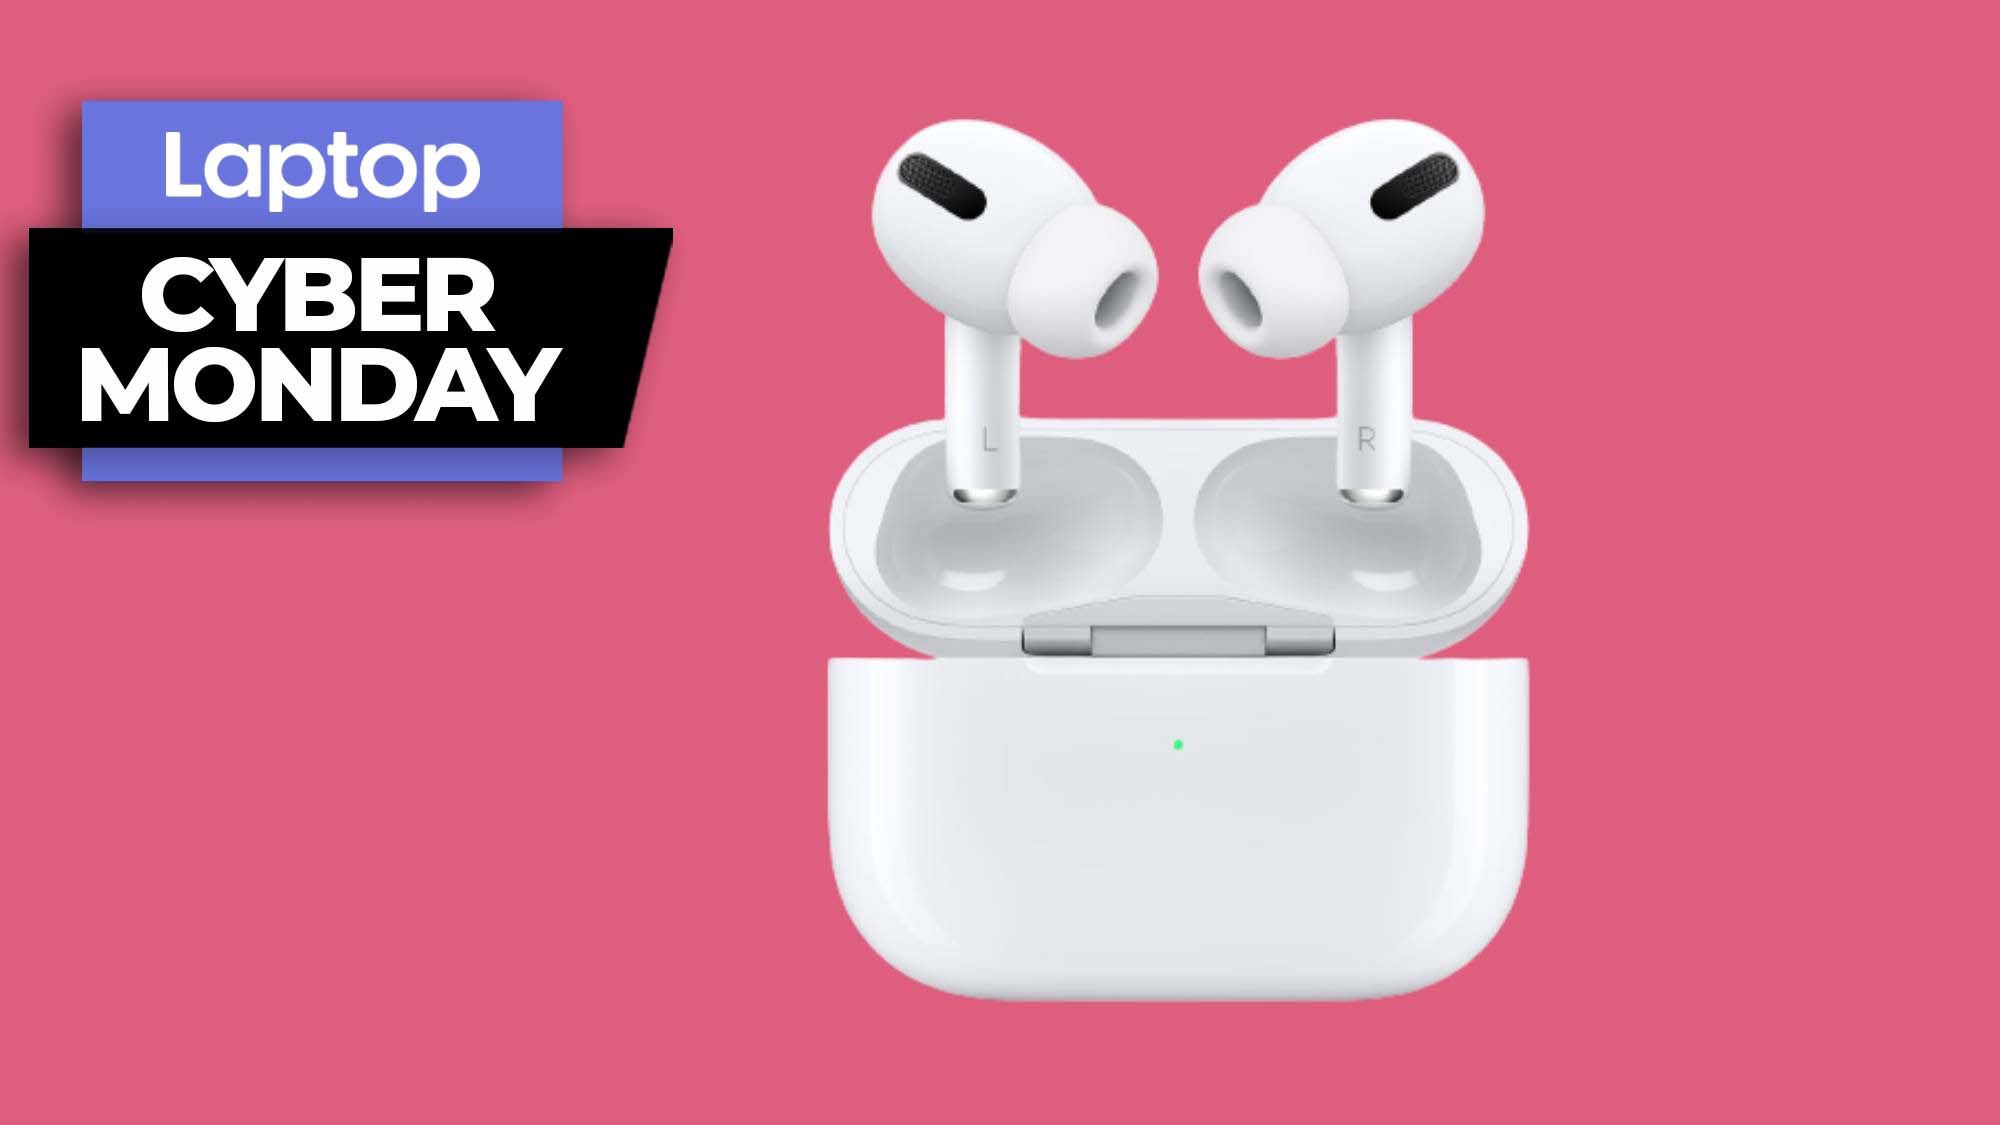 AirPods Pro Cyber Monday deal